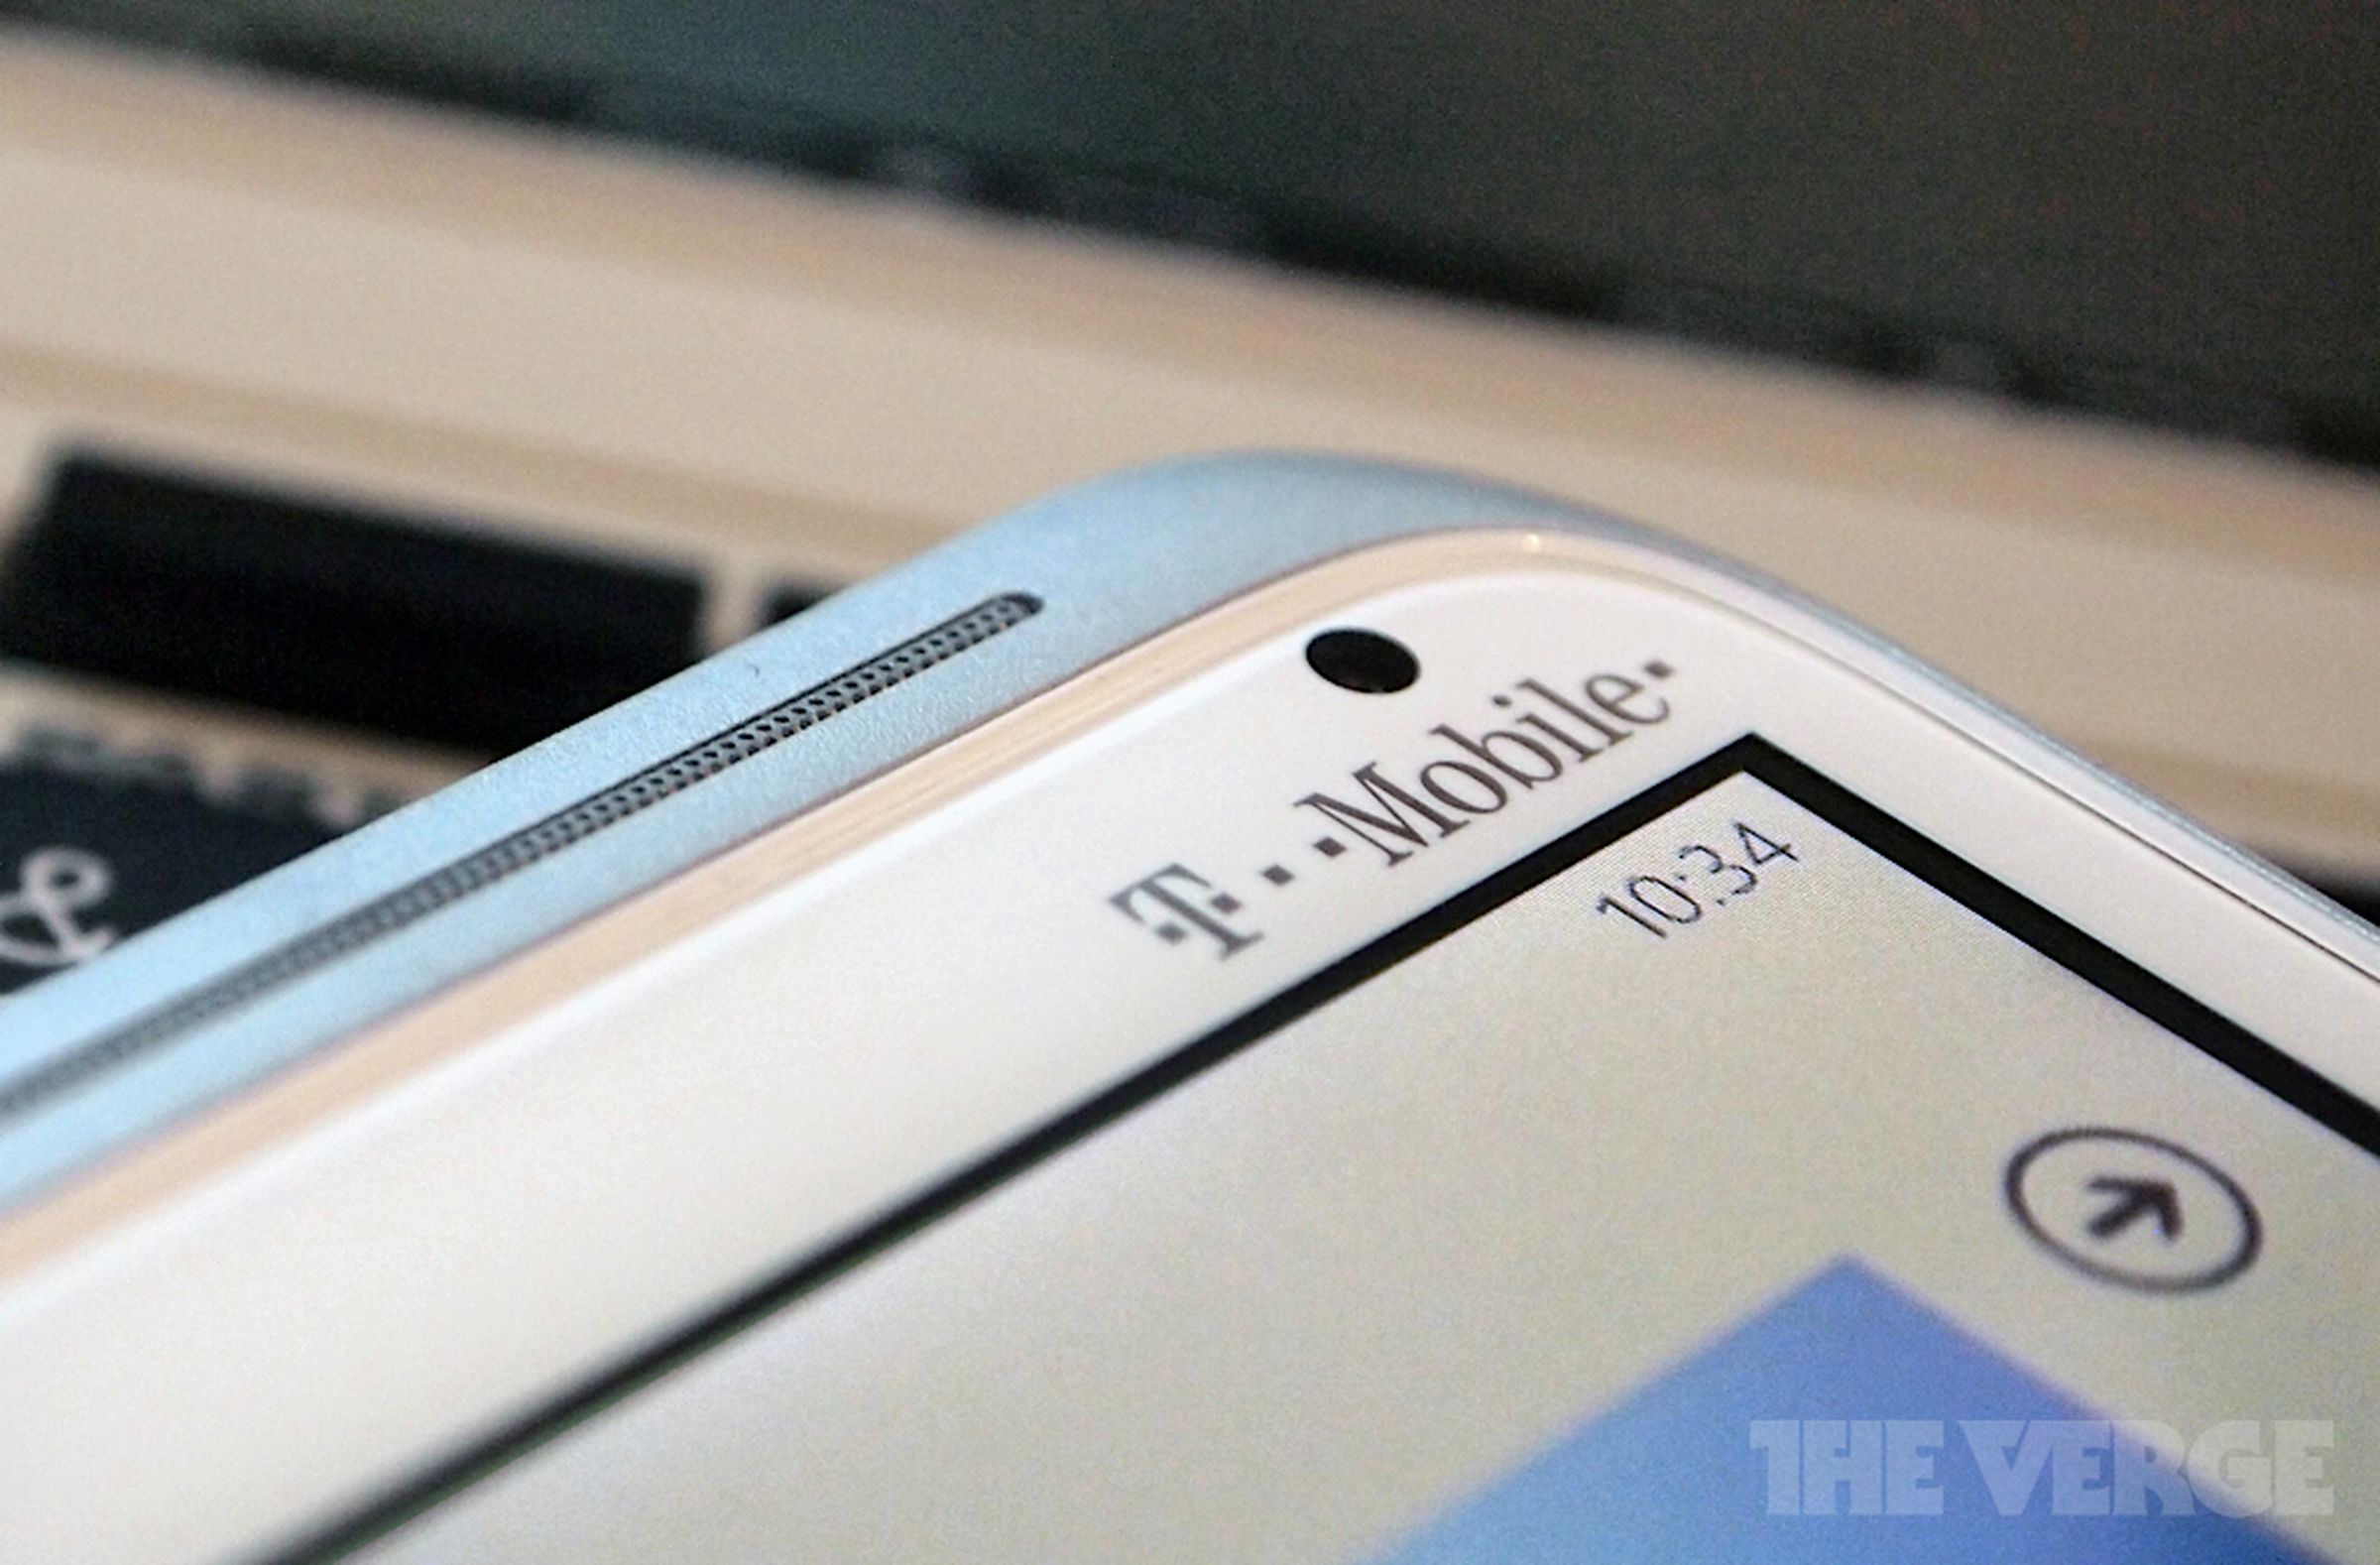 HTC Radar 4G review pictures